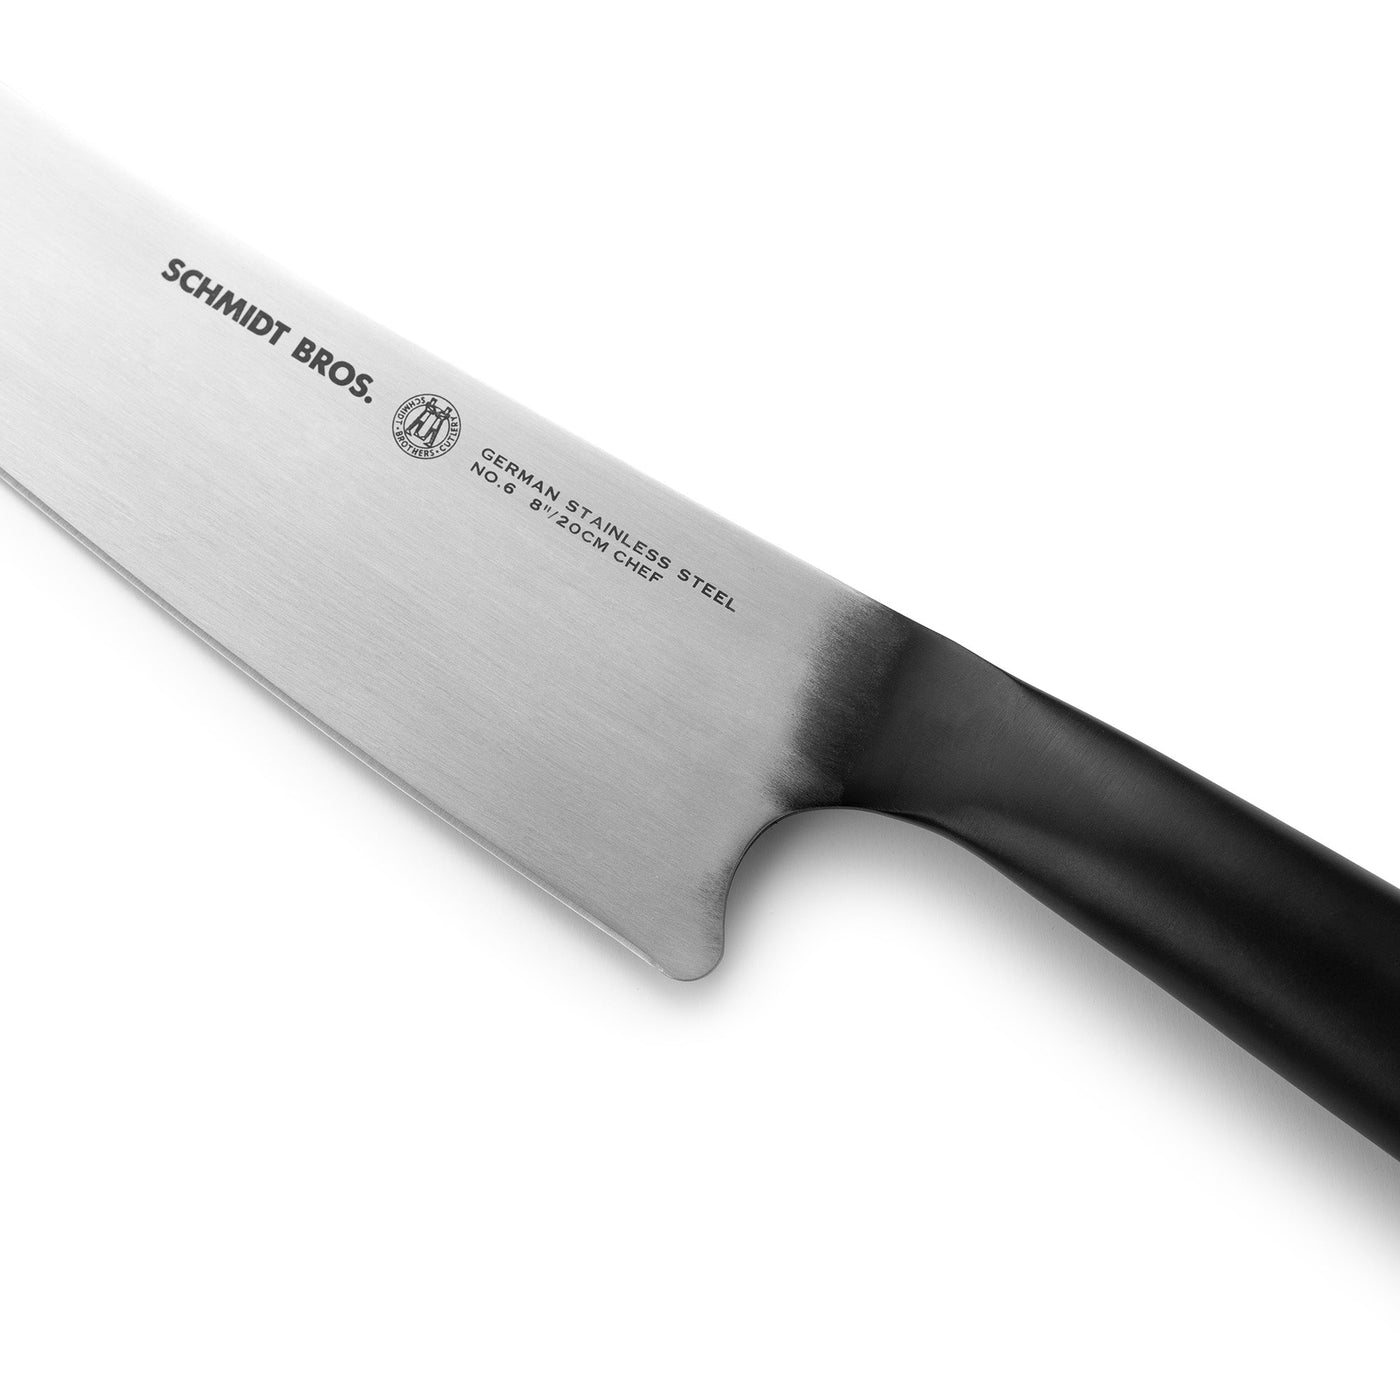 https://schmidtbrothers.com/cdn/shop/files/schmidt-brothers-kitchen-cutlery-schmidt-brothers-carbon-6-7-piece-knife-set-high-carbon-stainless-steel-cutlery-with-acacia-and-acrylic-magnetic-knife-block-30743412703293_1400x.jpg?v=1684150301